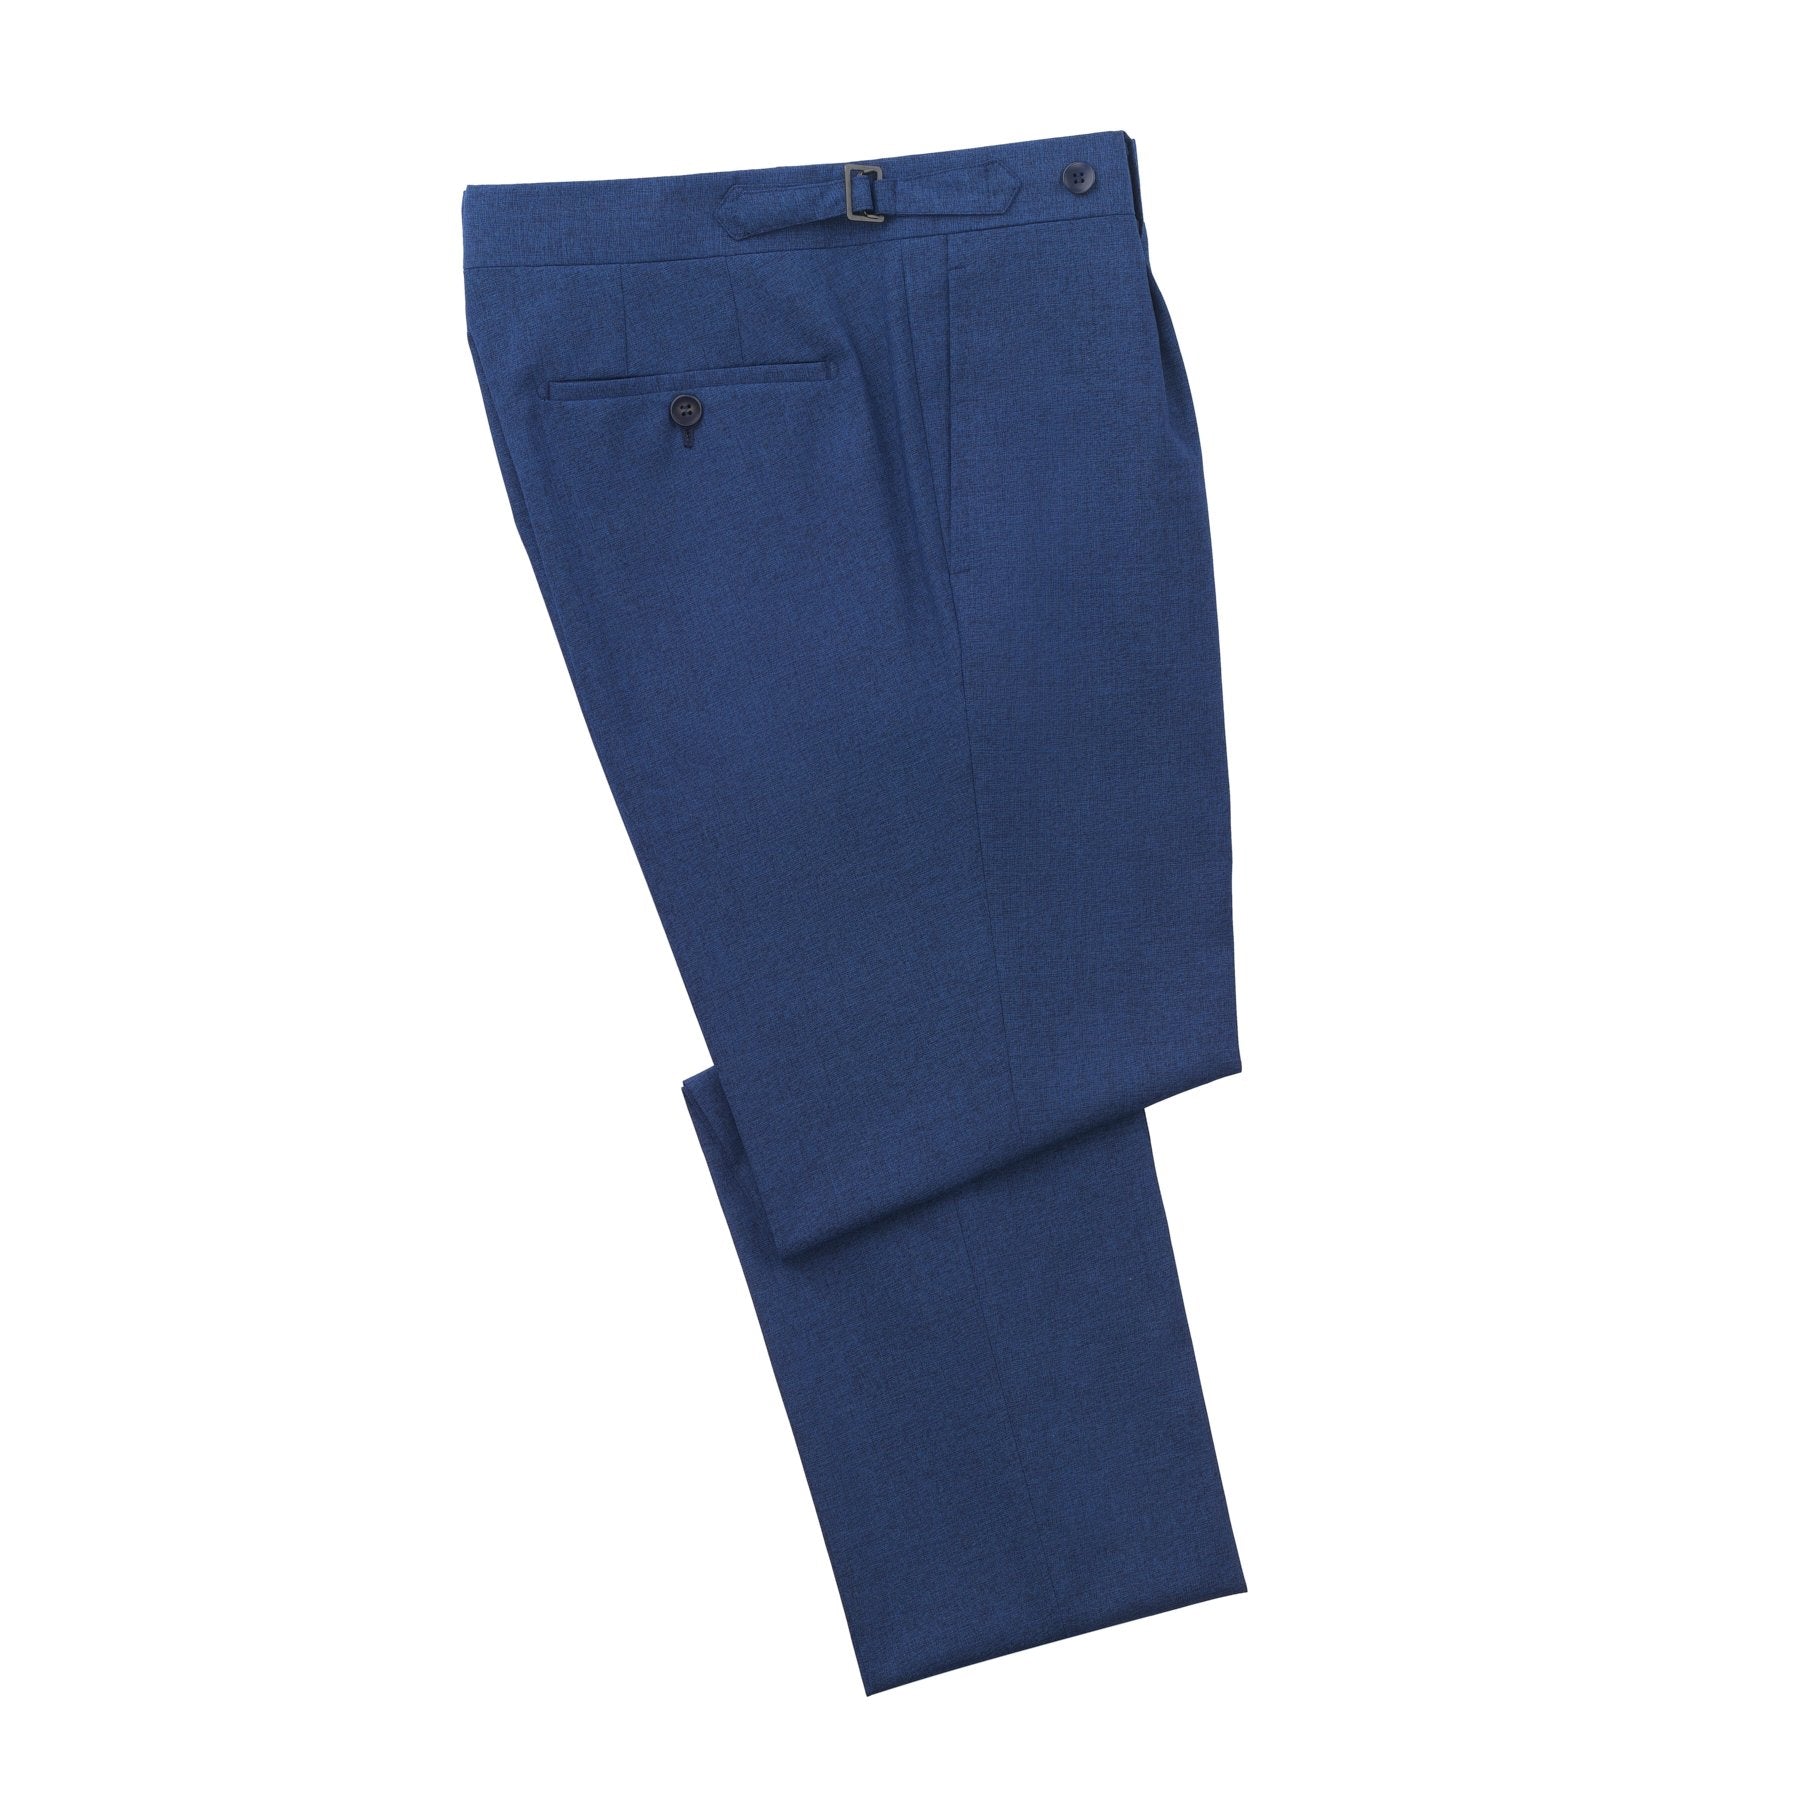 Rota Slim-Fit Pleated Wool and Silk-Blend Blue Trousers with Buckle ...